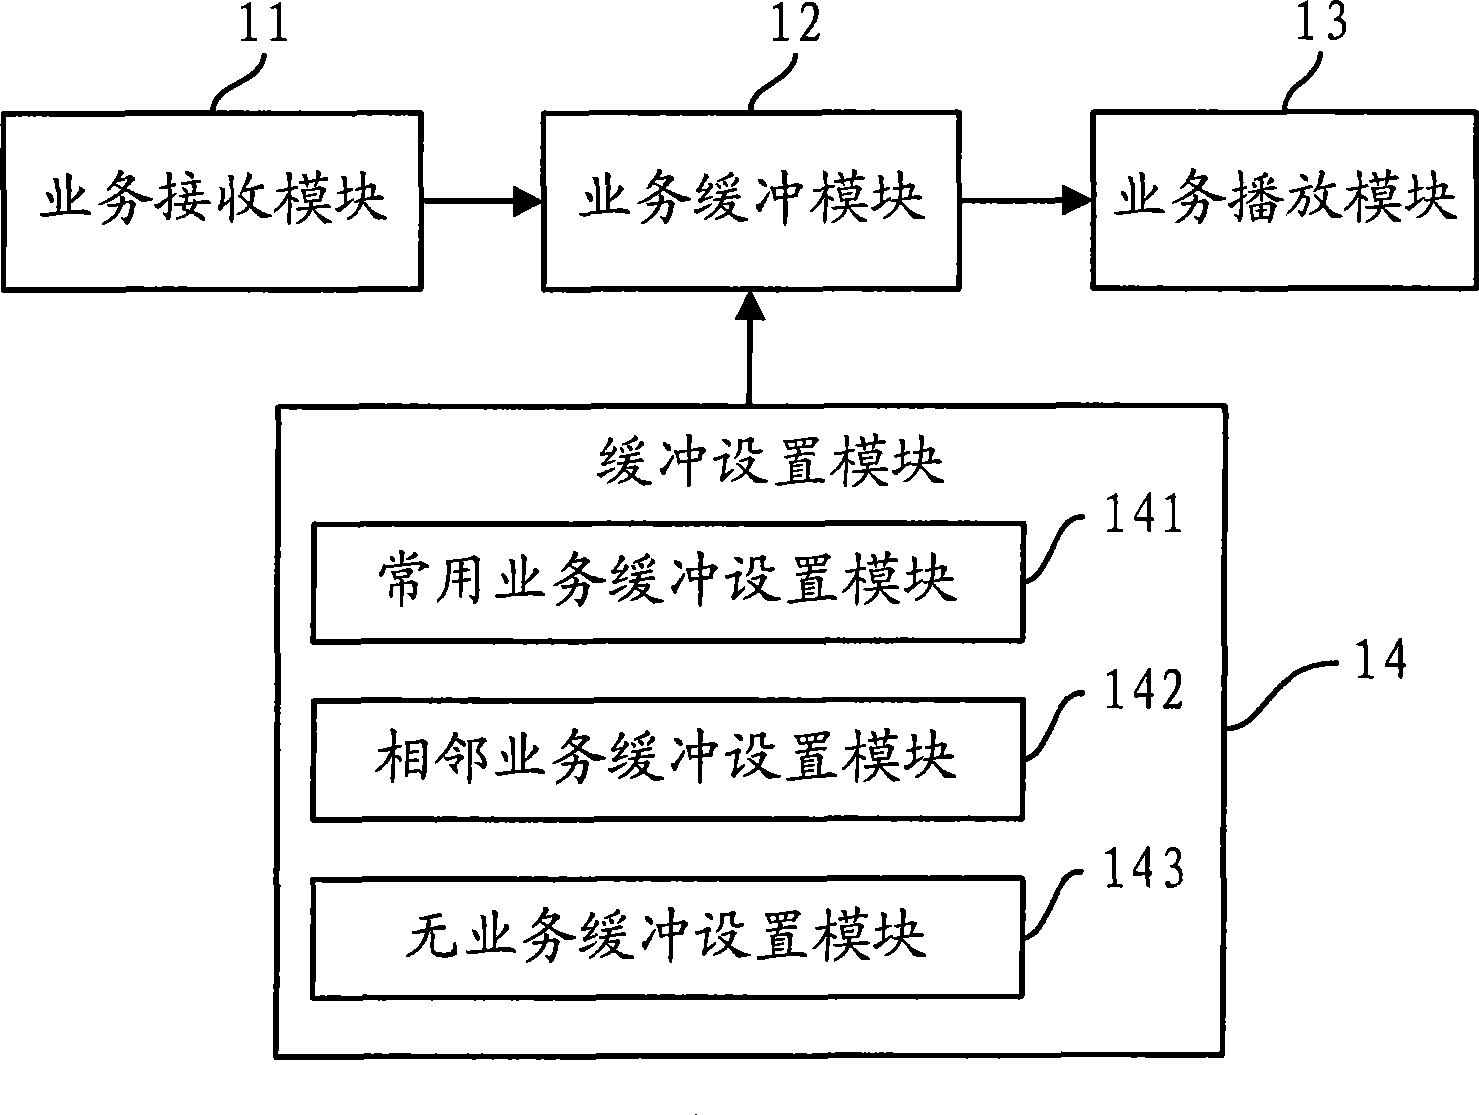 Streaming media service receiving device, method and mobile terminal thereof